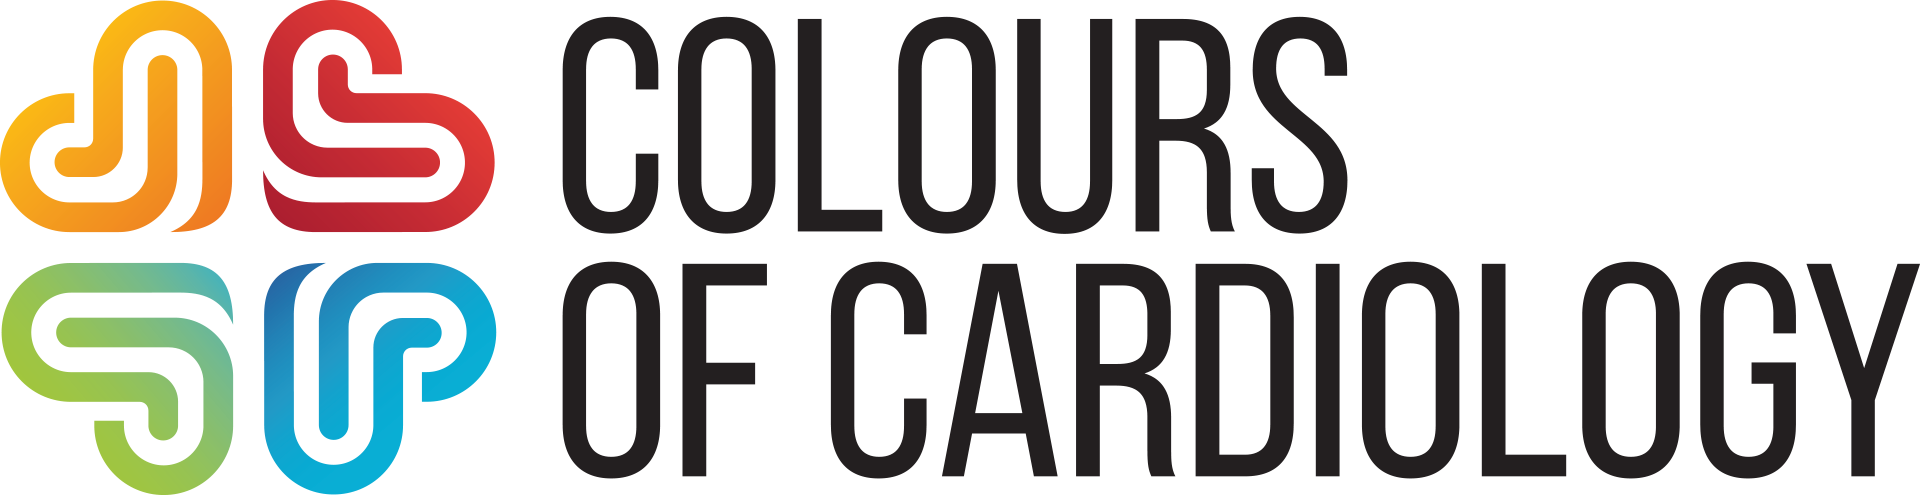 Colours of Cardiology logo